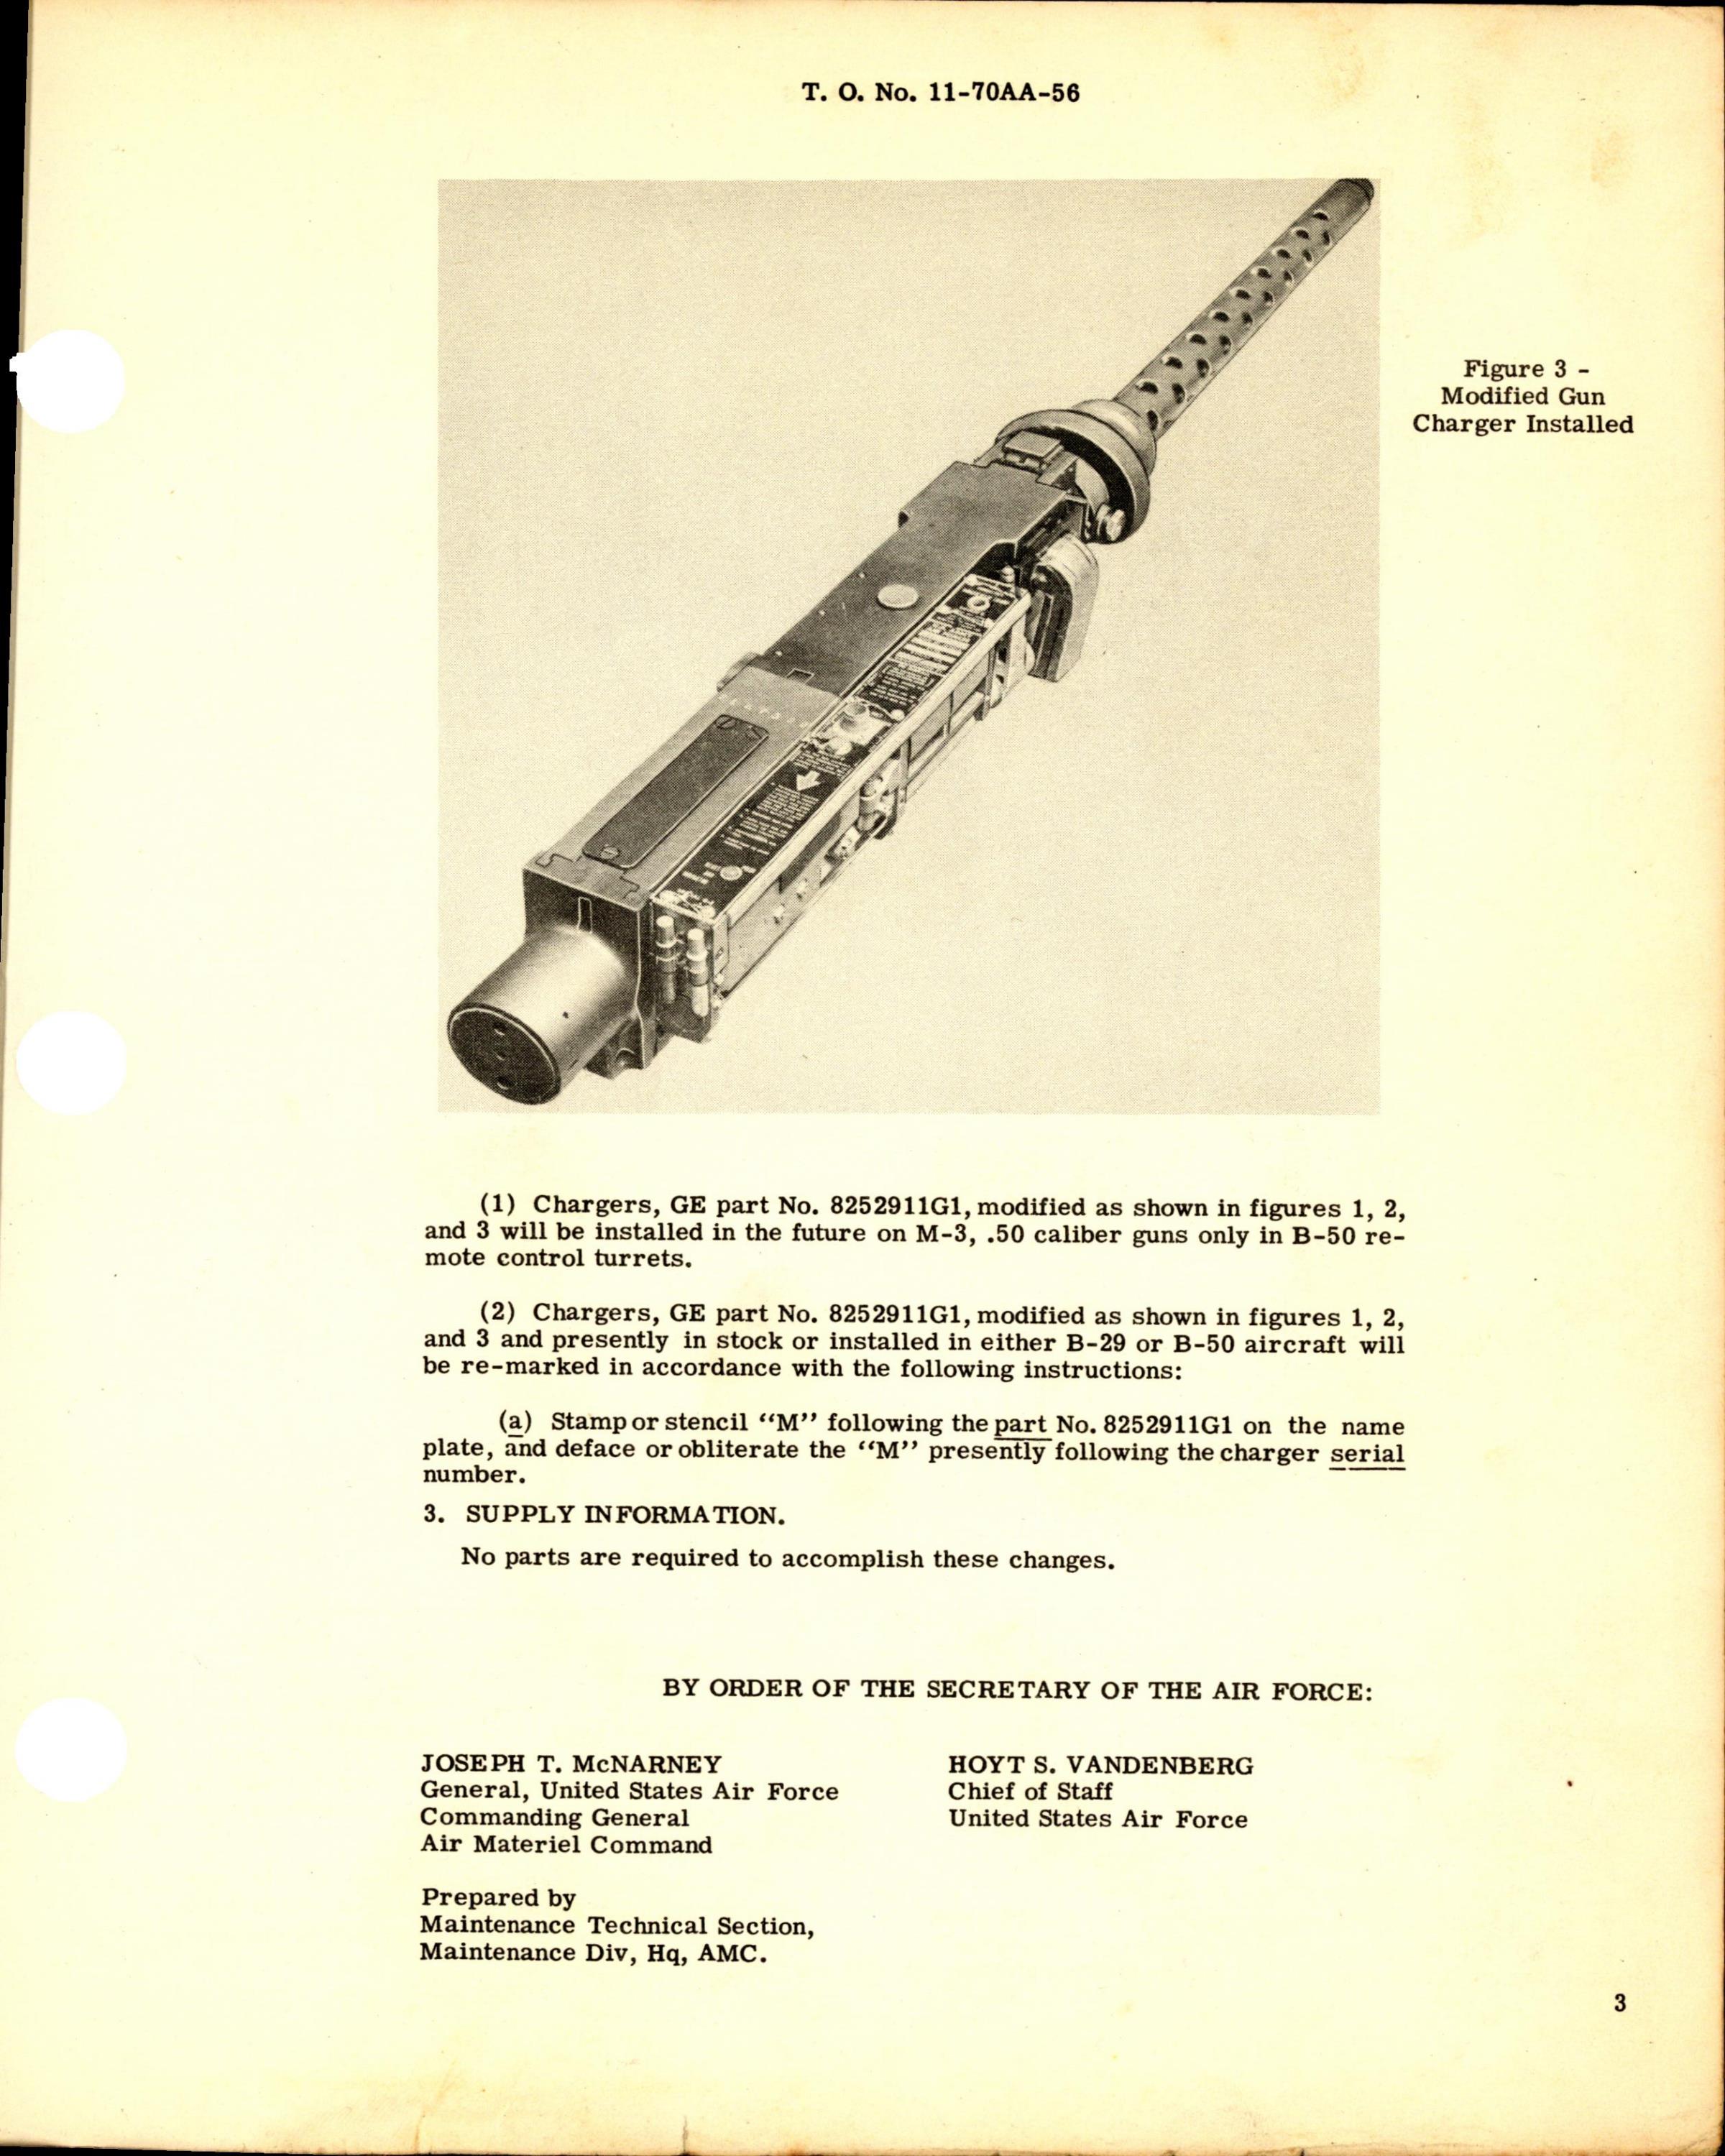 Sample page 3 from AirCorps Library document: Applicability of Modified Gun Charger Part No. 8252911G1